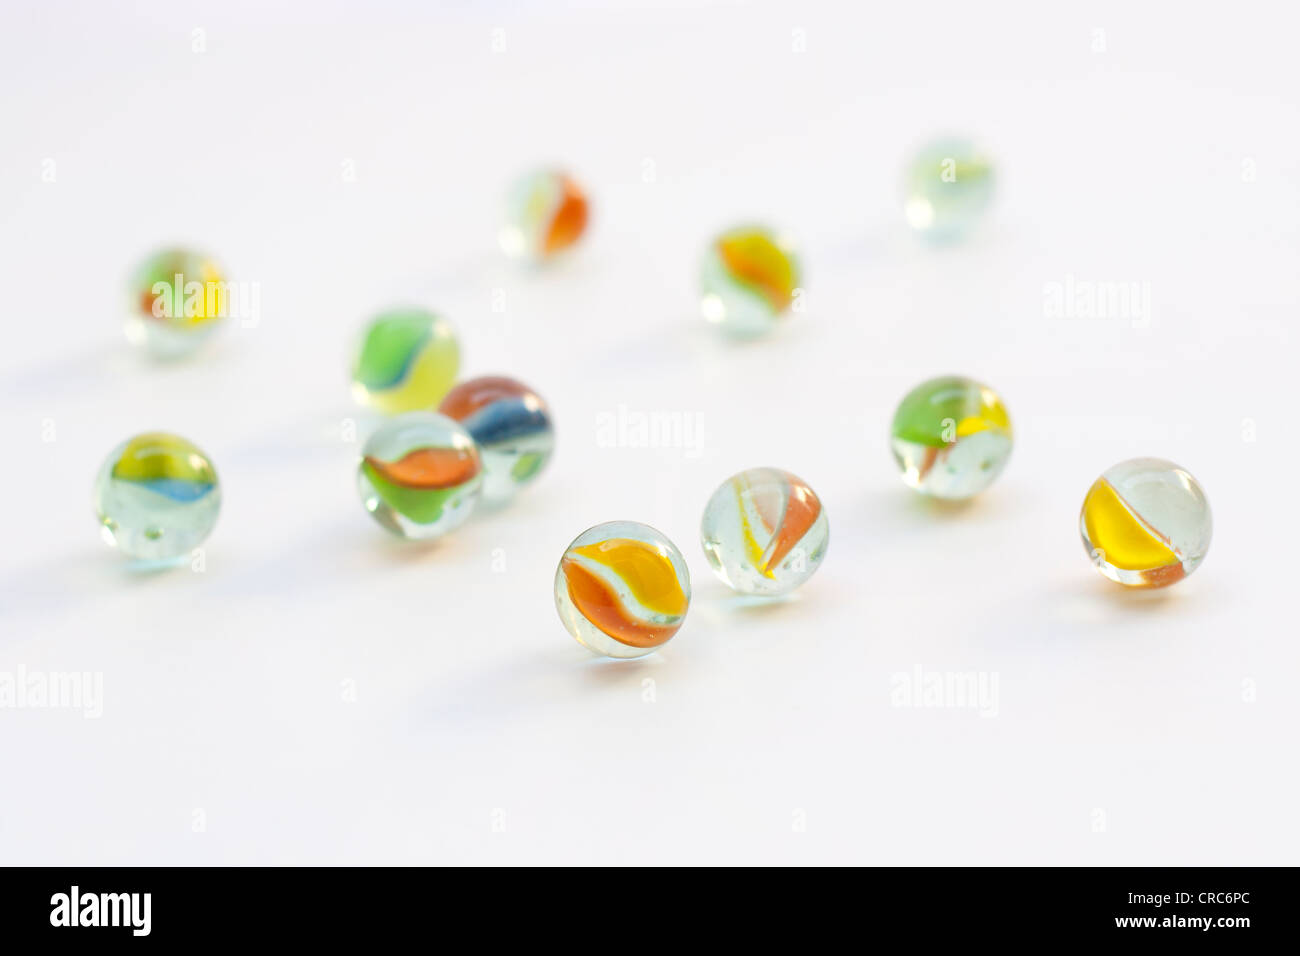 glass ball, sphere shape toy, transparent and colorful Stock Photo